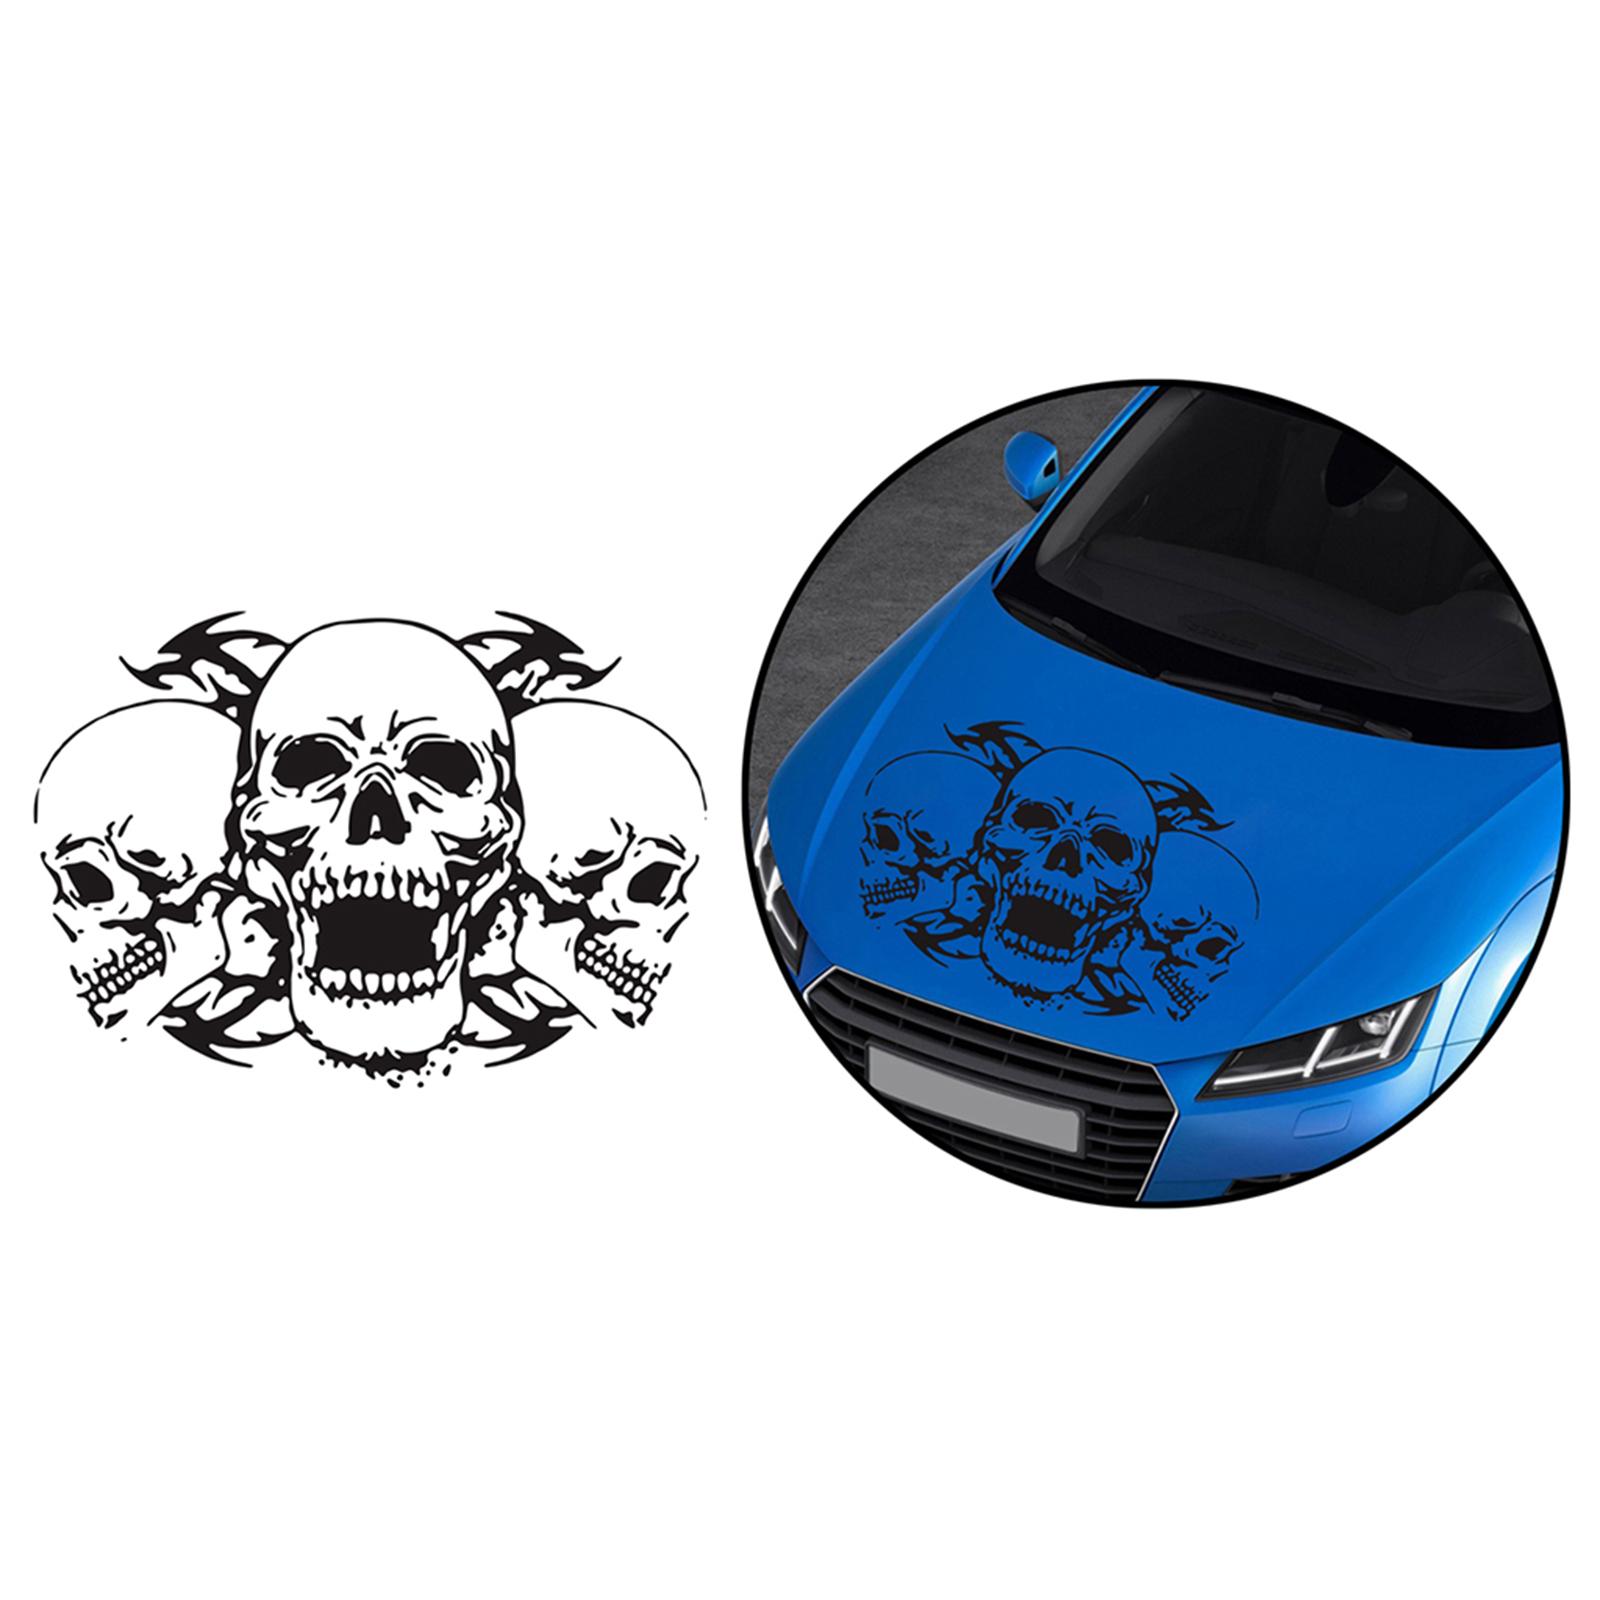 Skull Head Car Bonnet Stickers Graphic Decal for Trucks Boats Yachts Black